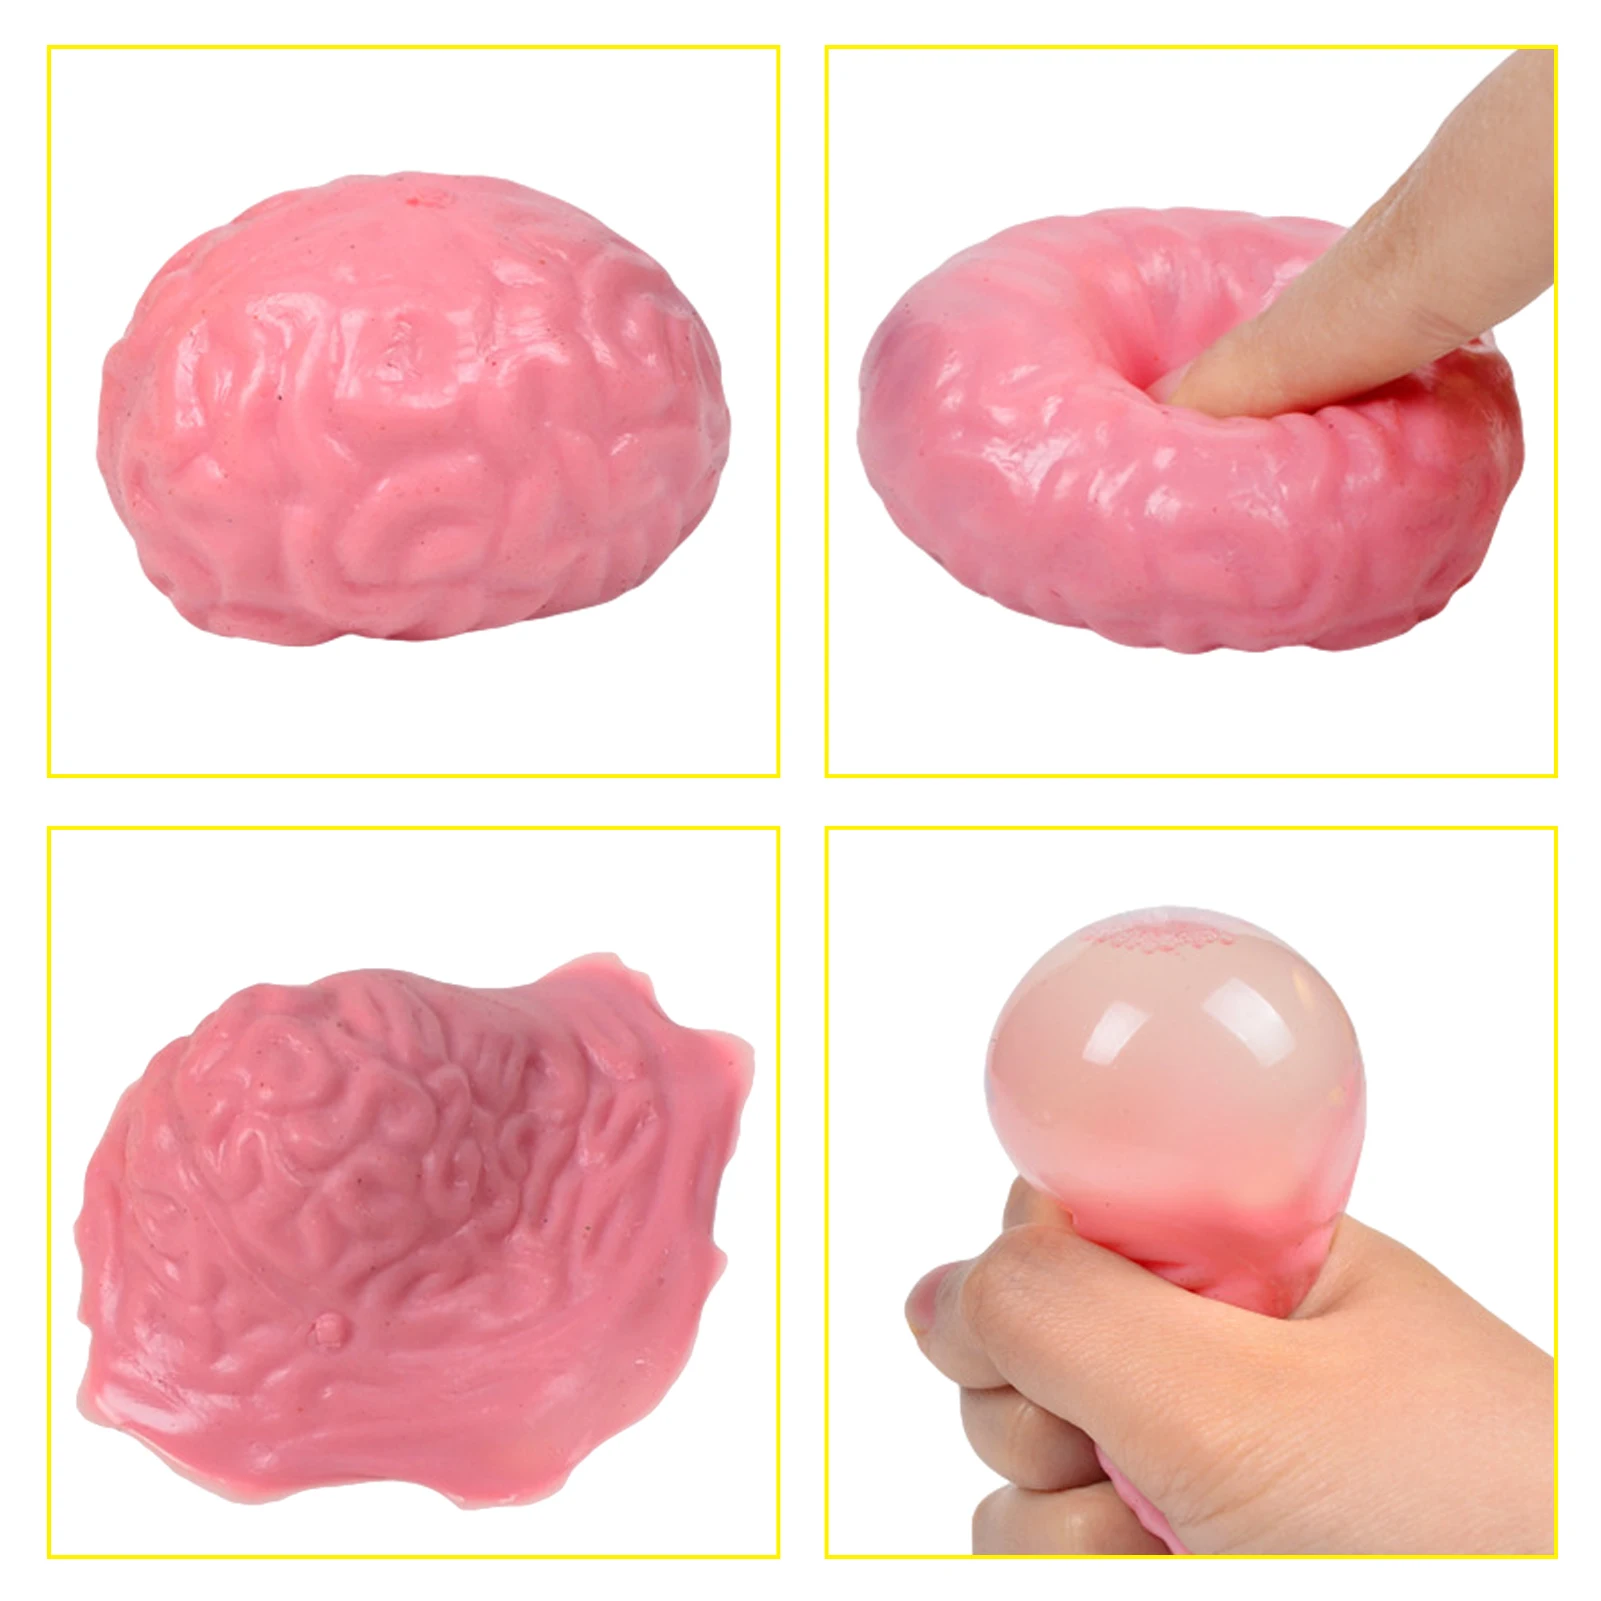 9Pcs Tomato Squishies Balls Kids Toys Antistress Prank Props Water Ball Autism Squeeze Stress Relief Fidget Toy Kids Gift enlarge